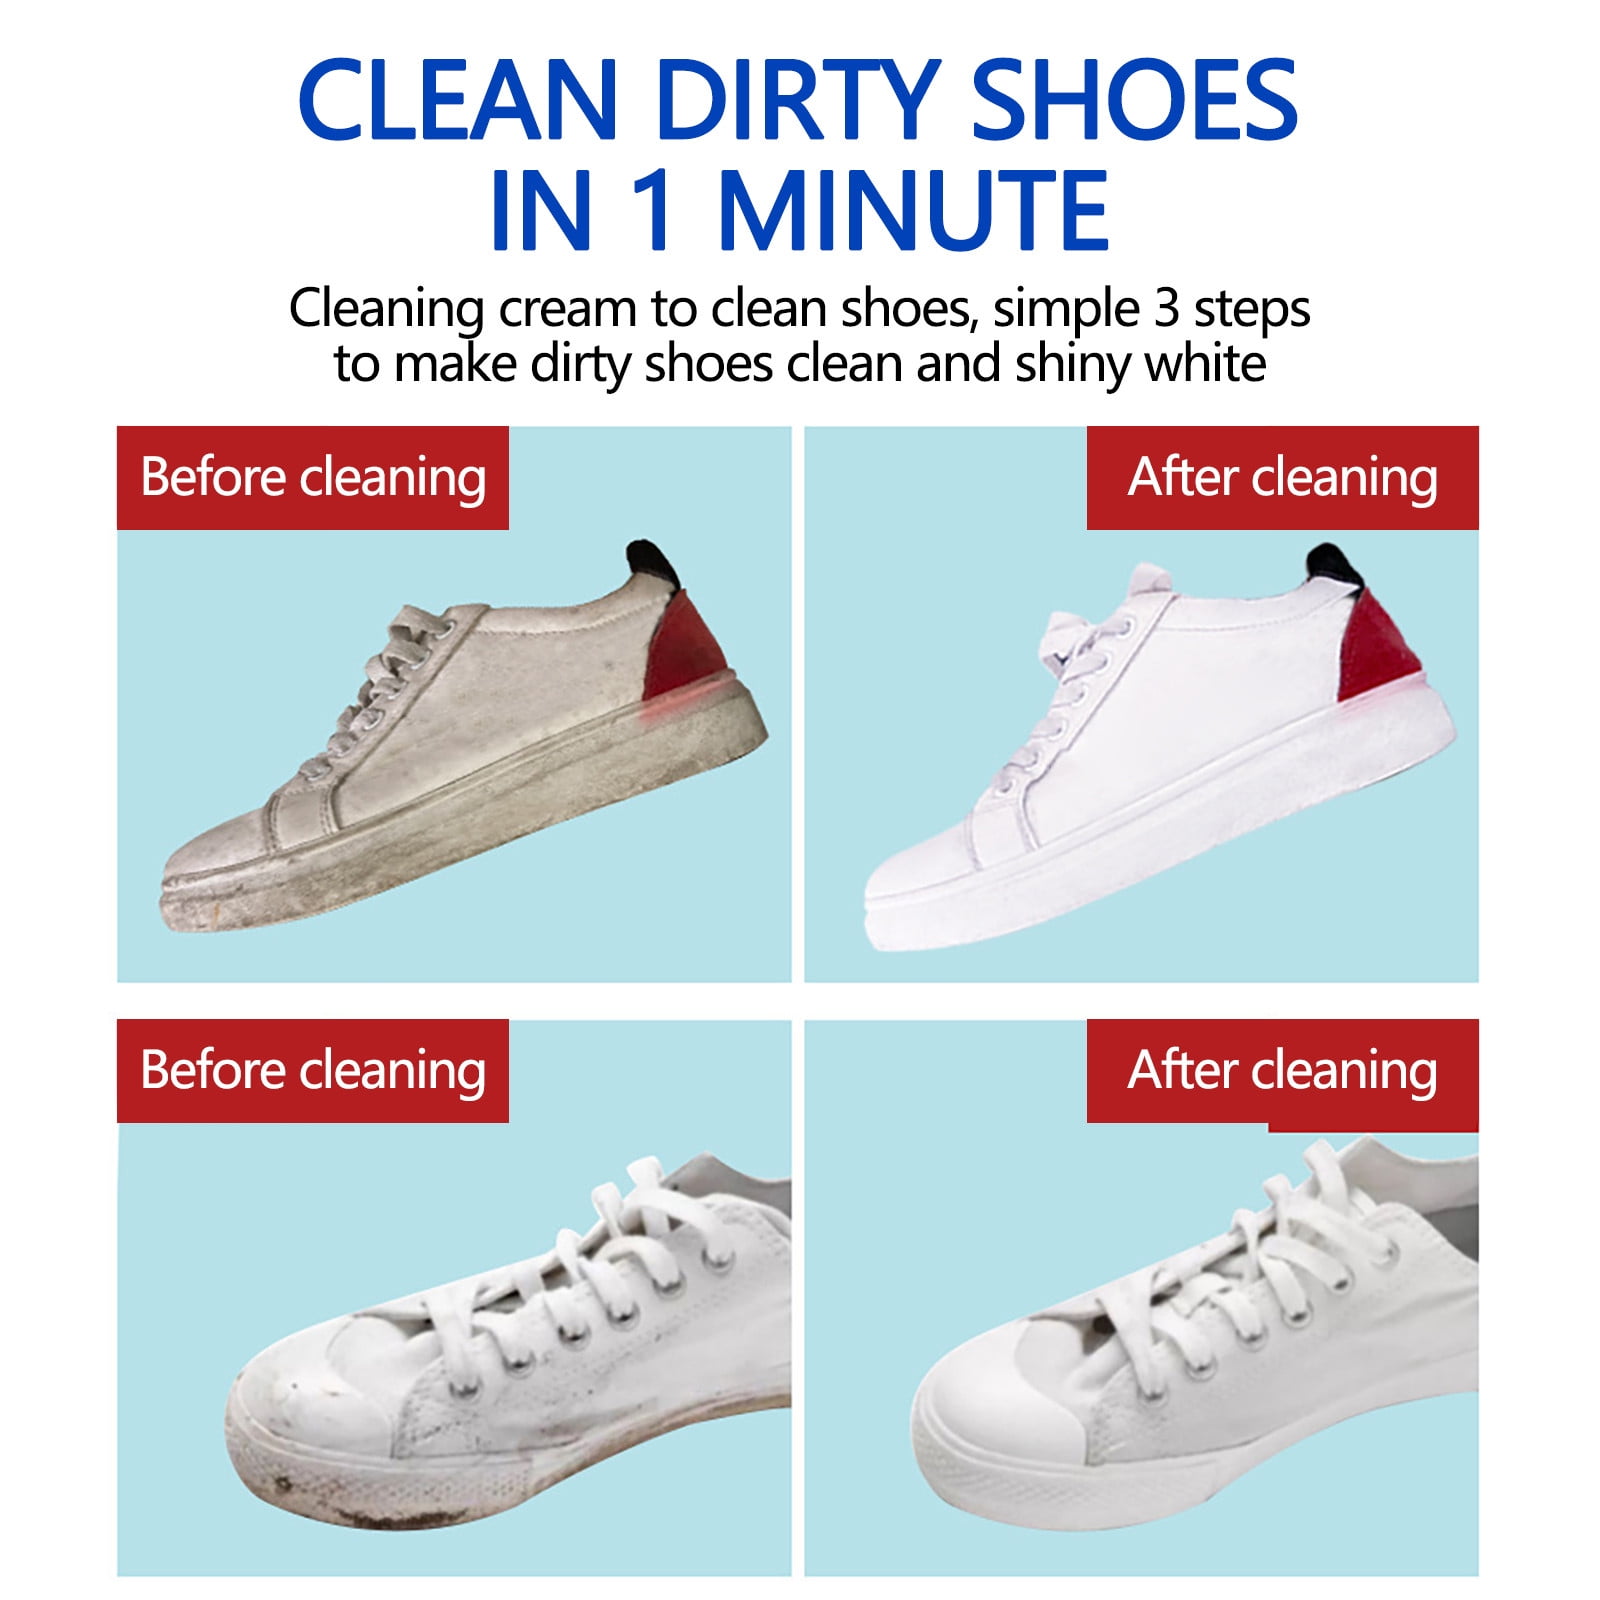 White Shoe Cleaning Cream, 260g White Shoes Cleaning Whitening Cleaner Cream Shoe Brush with Wipe Sponge, Shoes Multifunctional Cleaning Cream, Shoe